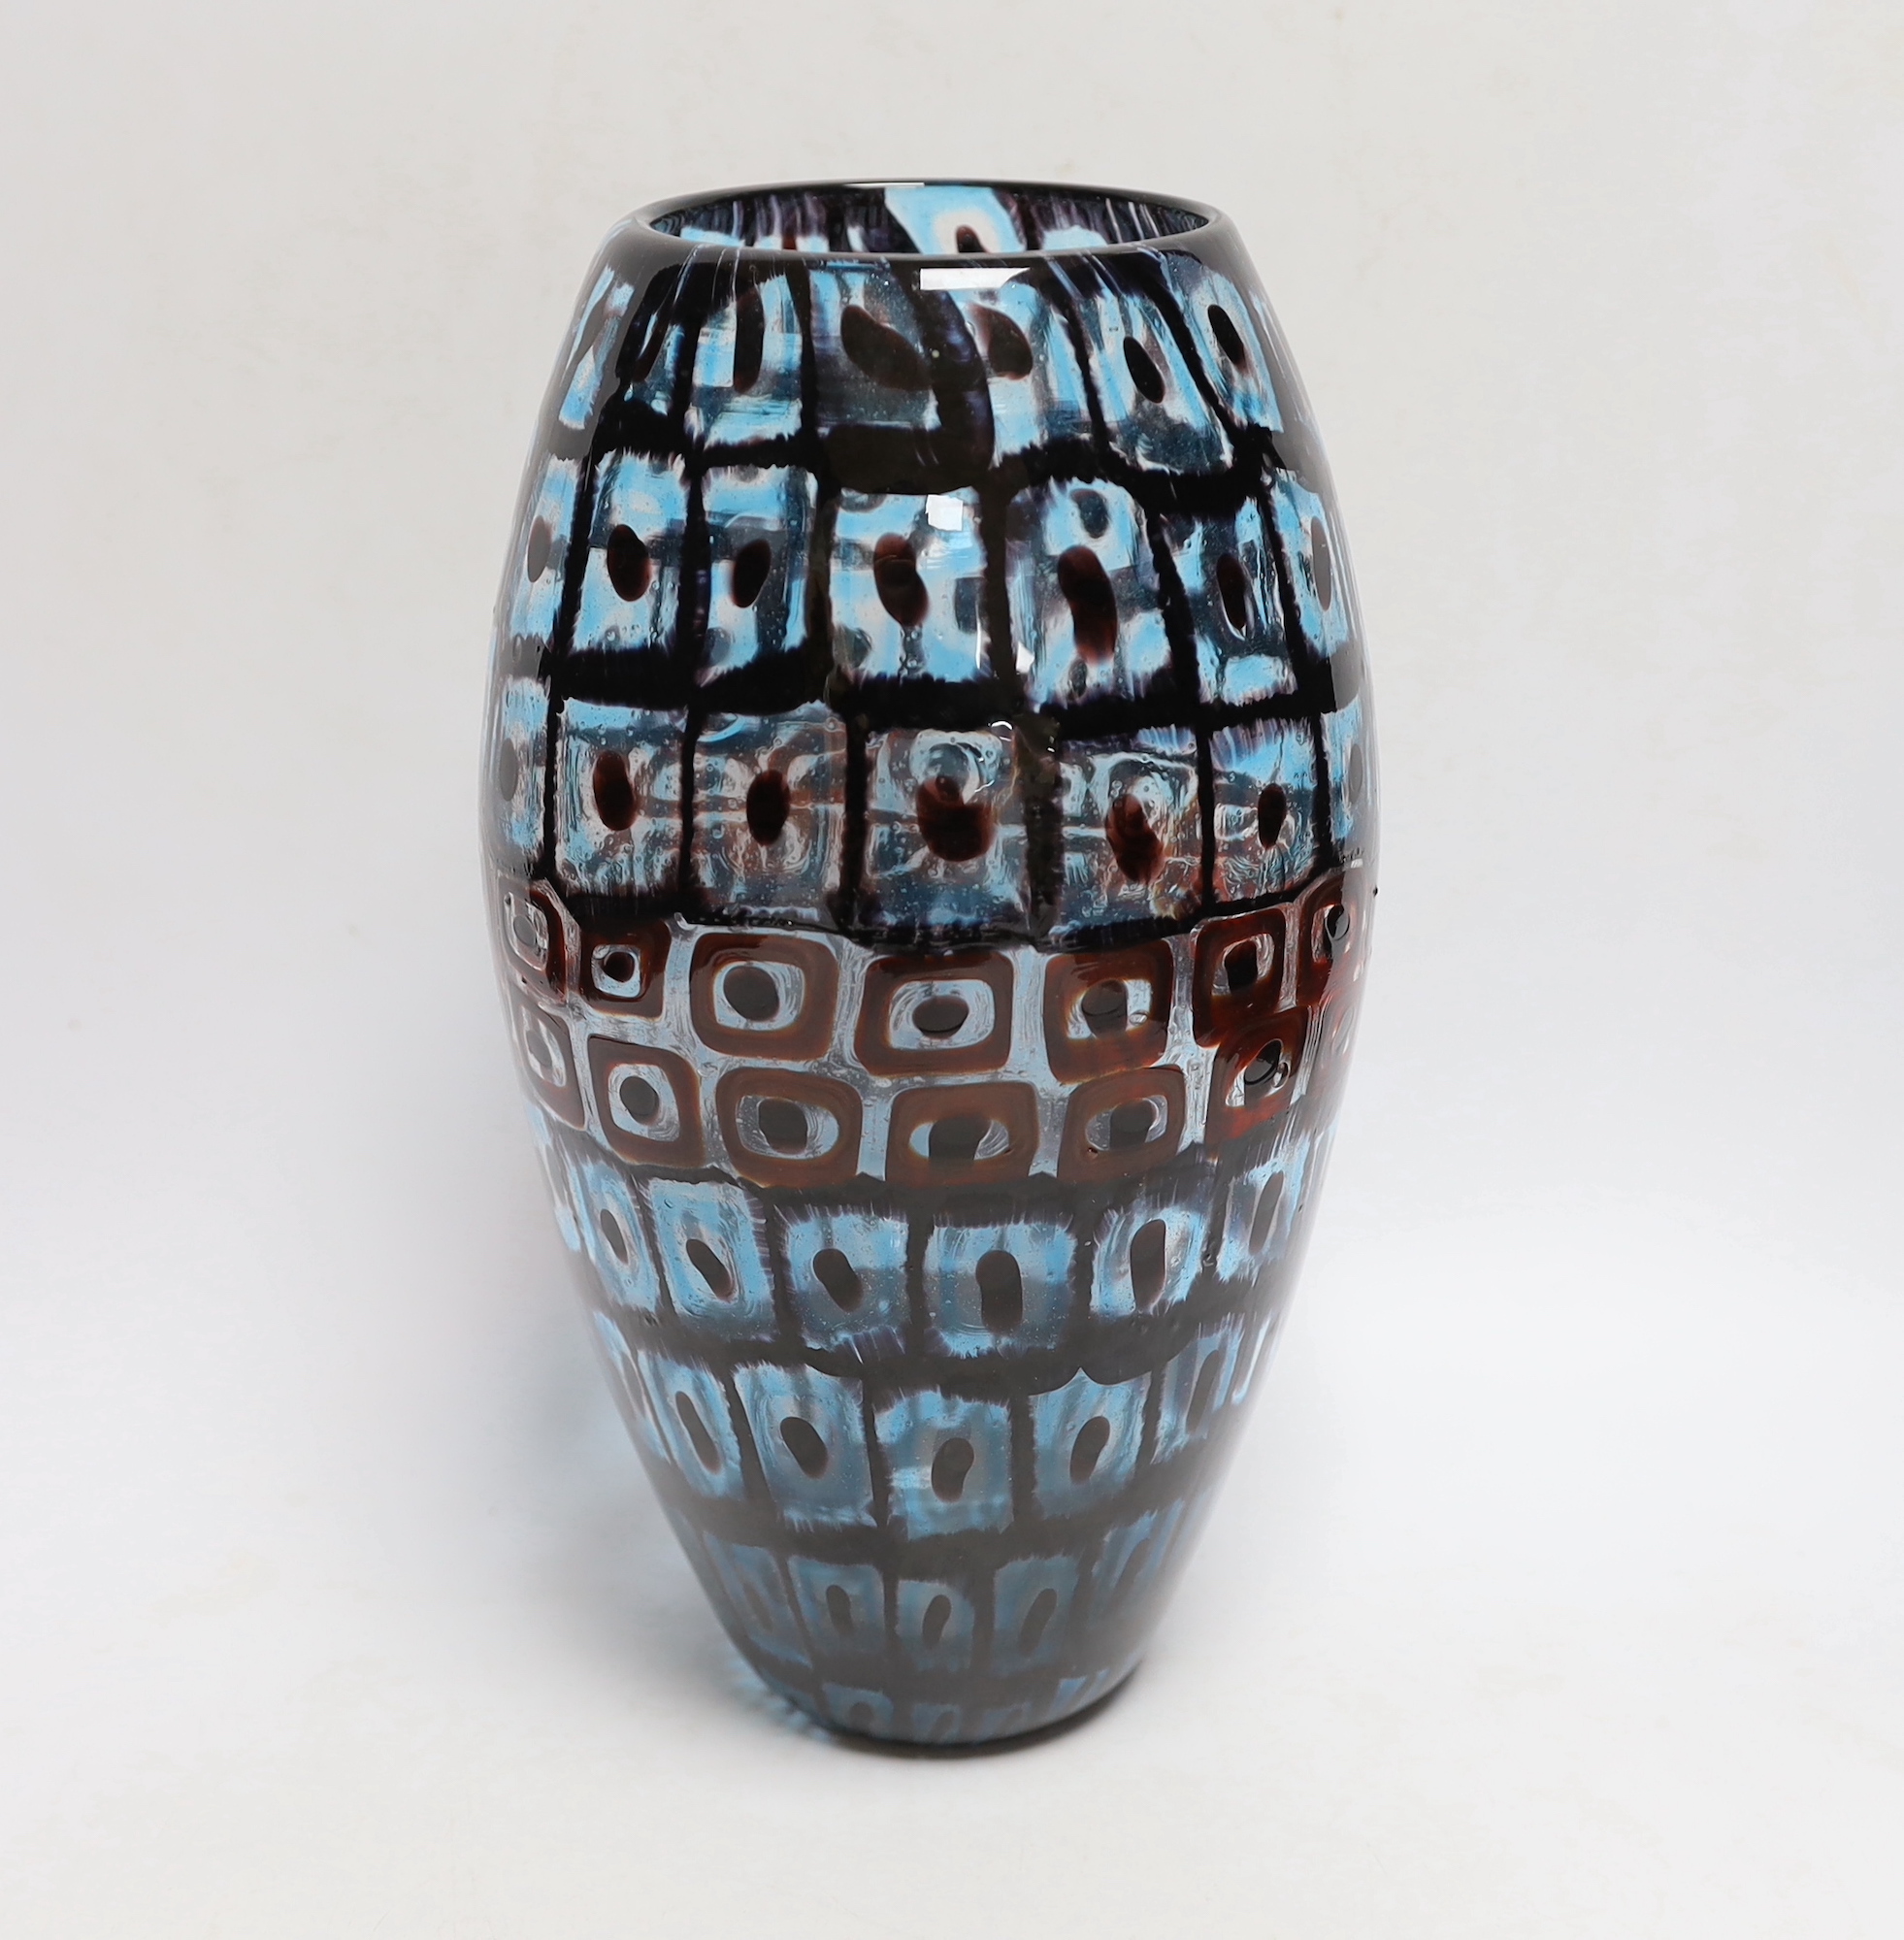 Vittorio Ferro (1932-2012) A Murano glass Murrine vase, ovoid shaped, with bands of squares in blue and red, unsigned, 29cm, Please note this lot attracts an additional import tax of 20% on the hammer price